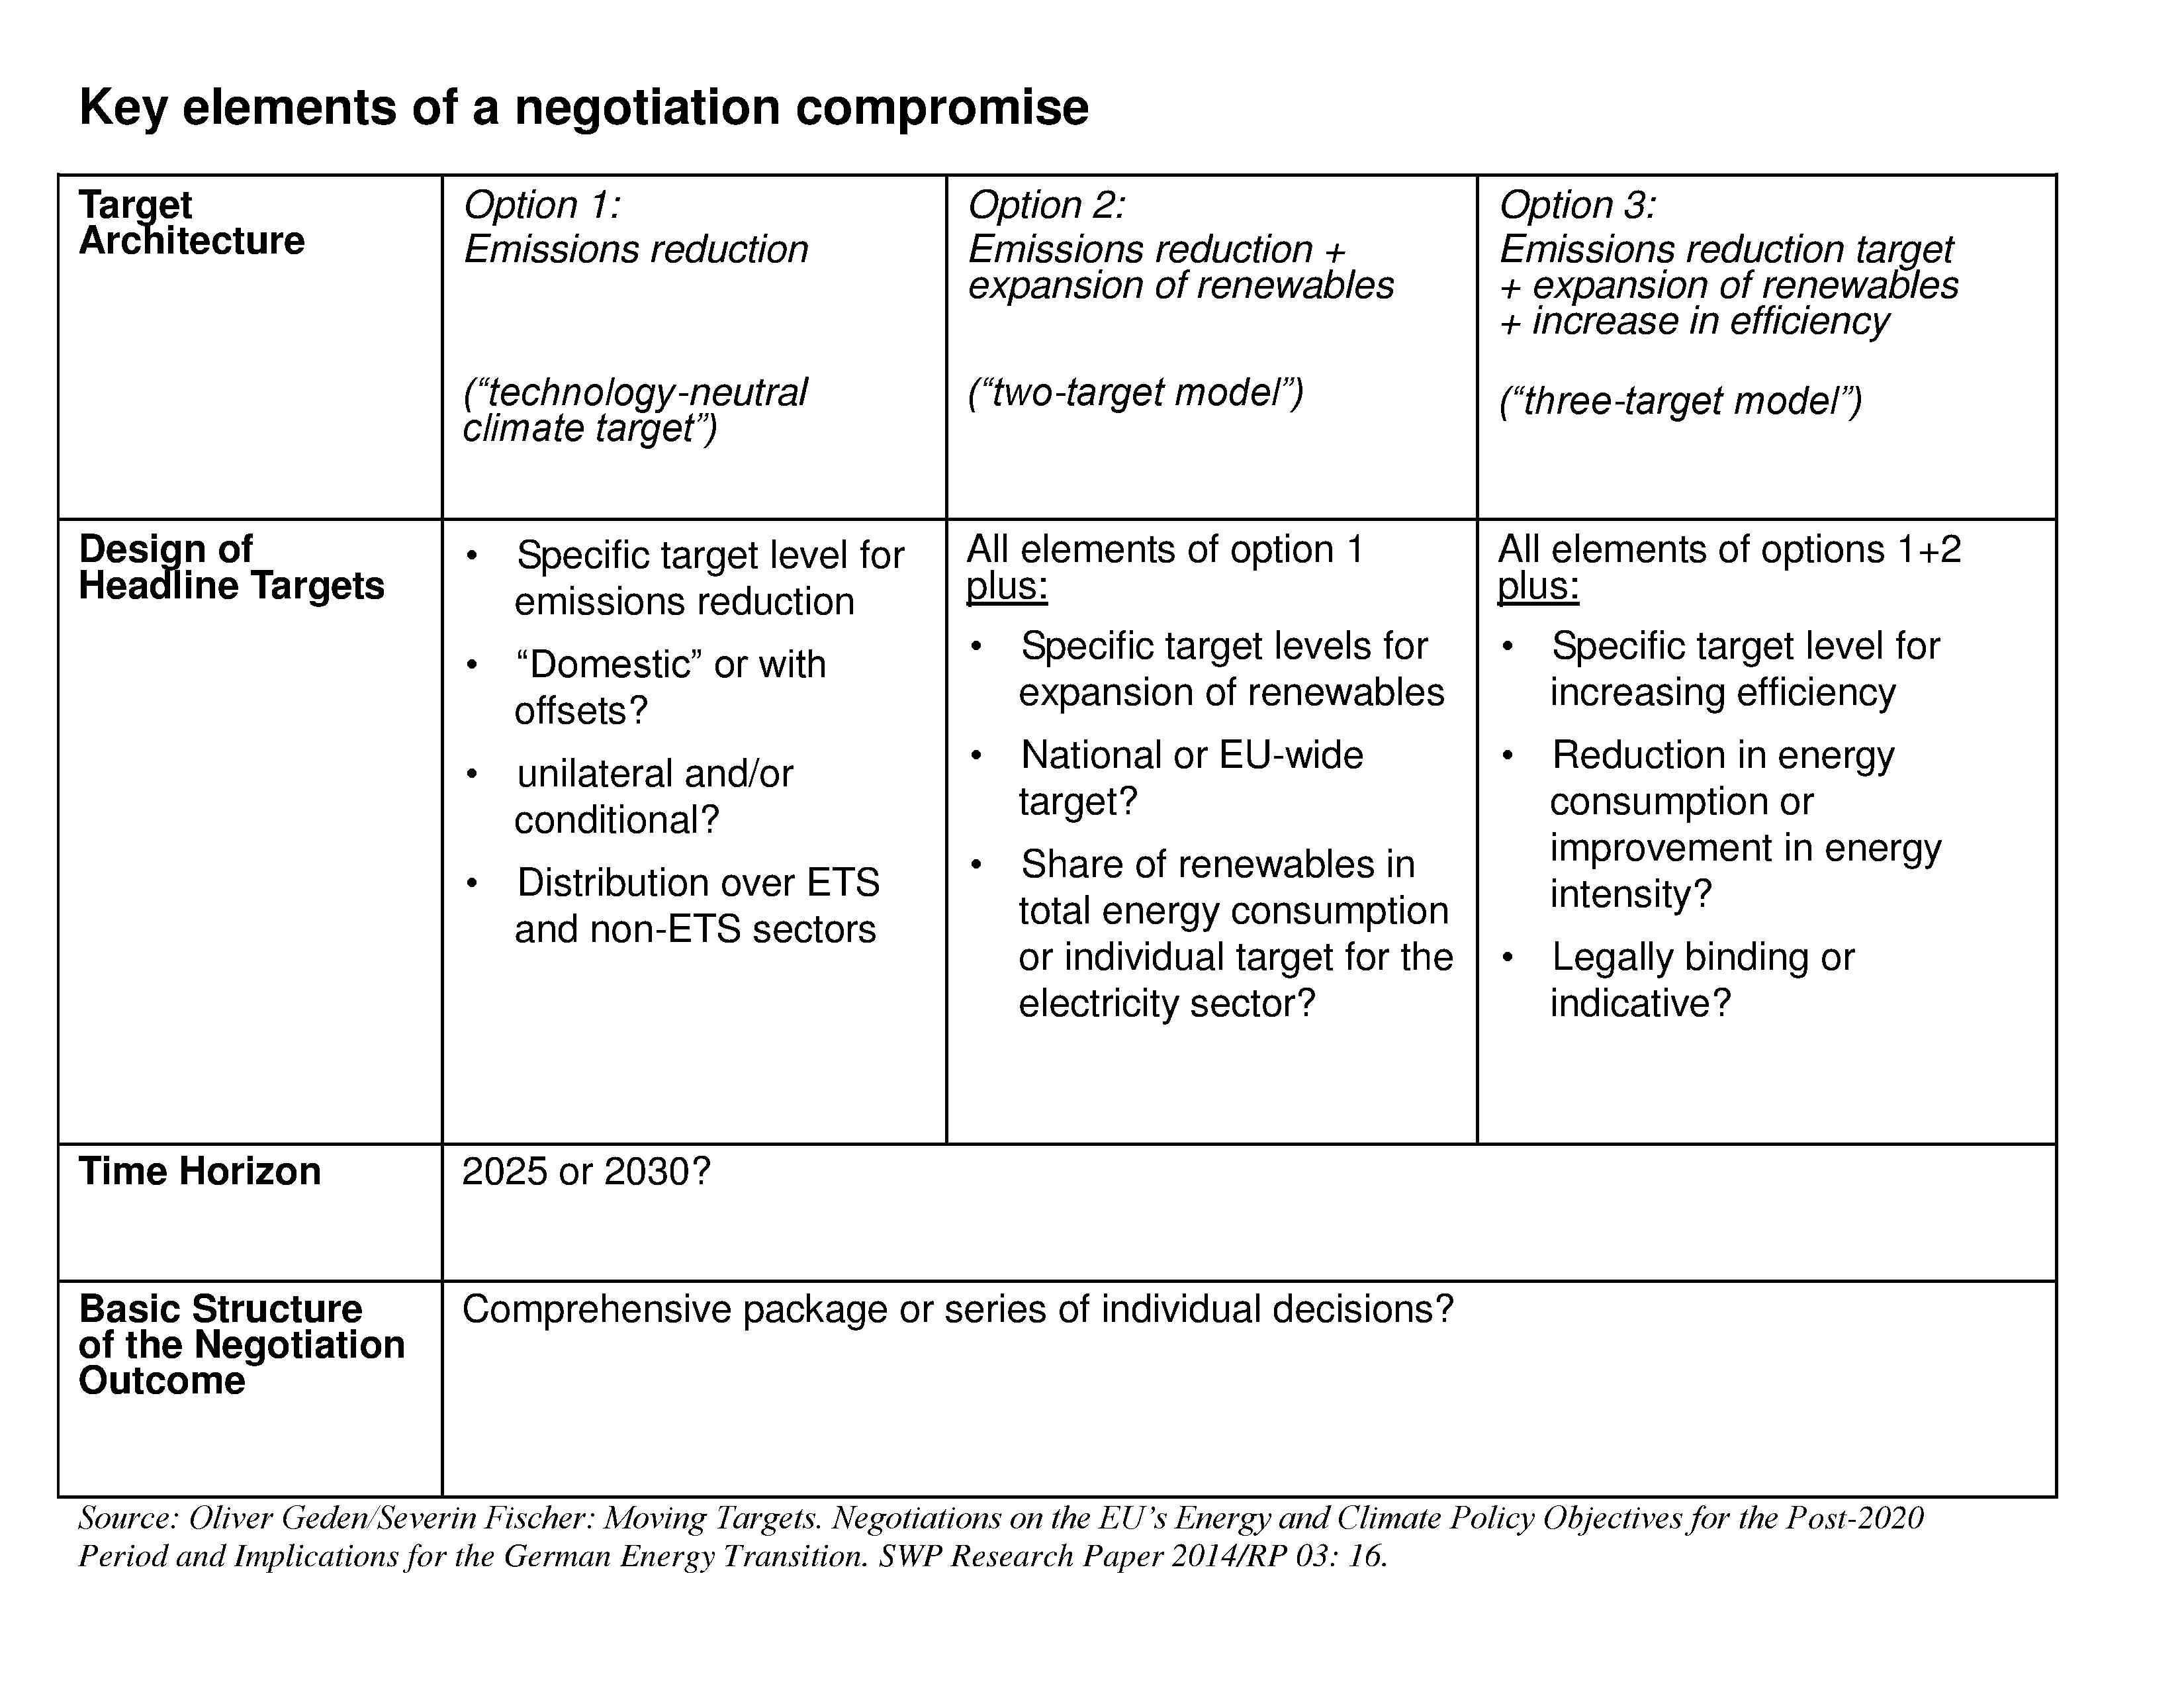 Key elements of a negotiation compromise1